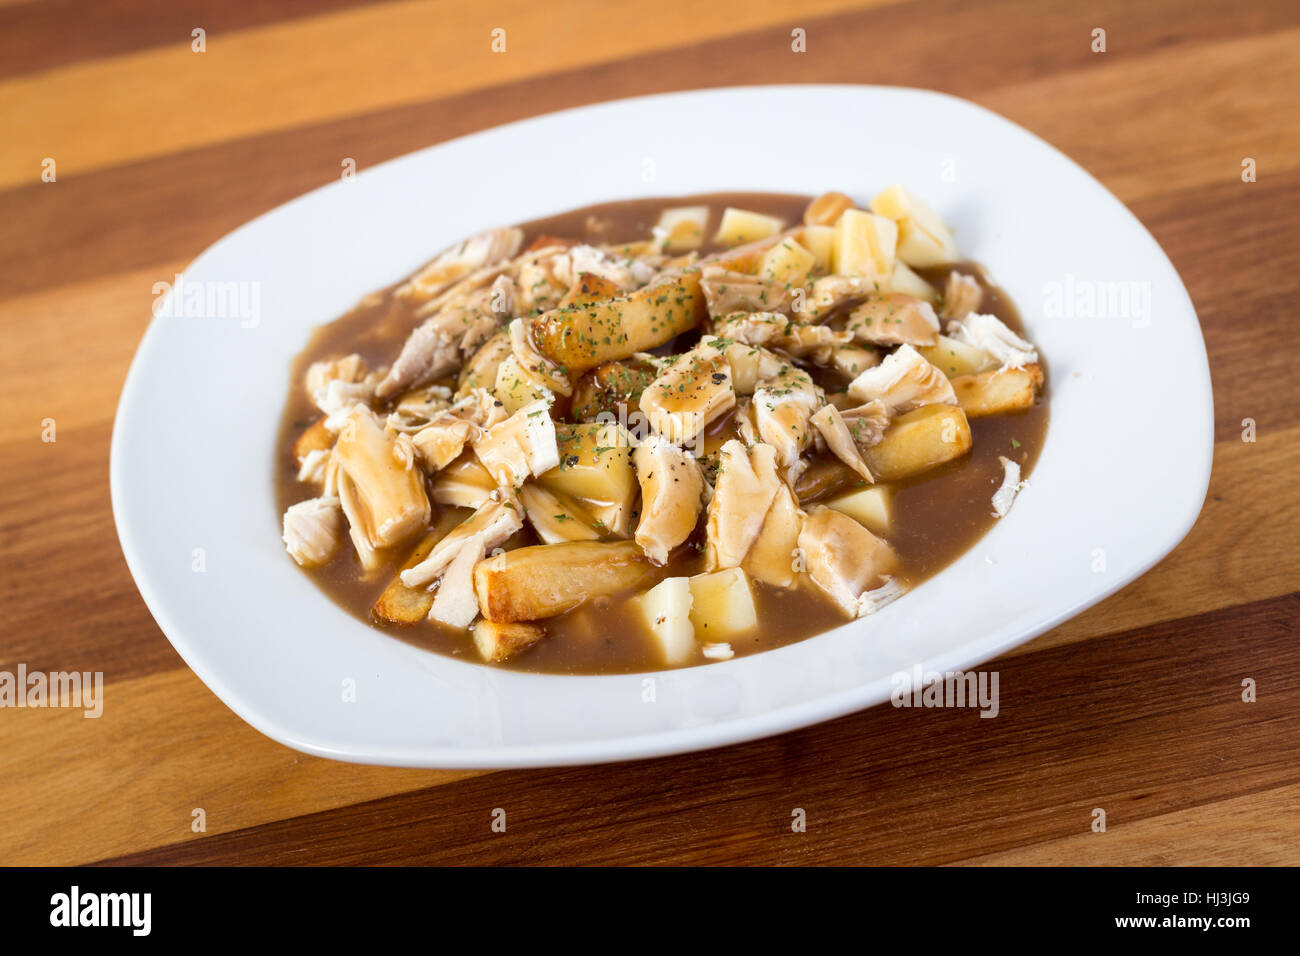 chicken poutine quebec cuisine made with gravy fried cheese curd and chicken Stock Photo